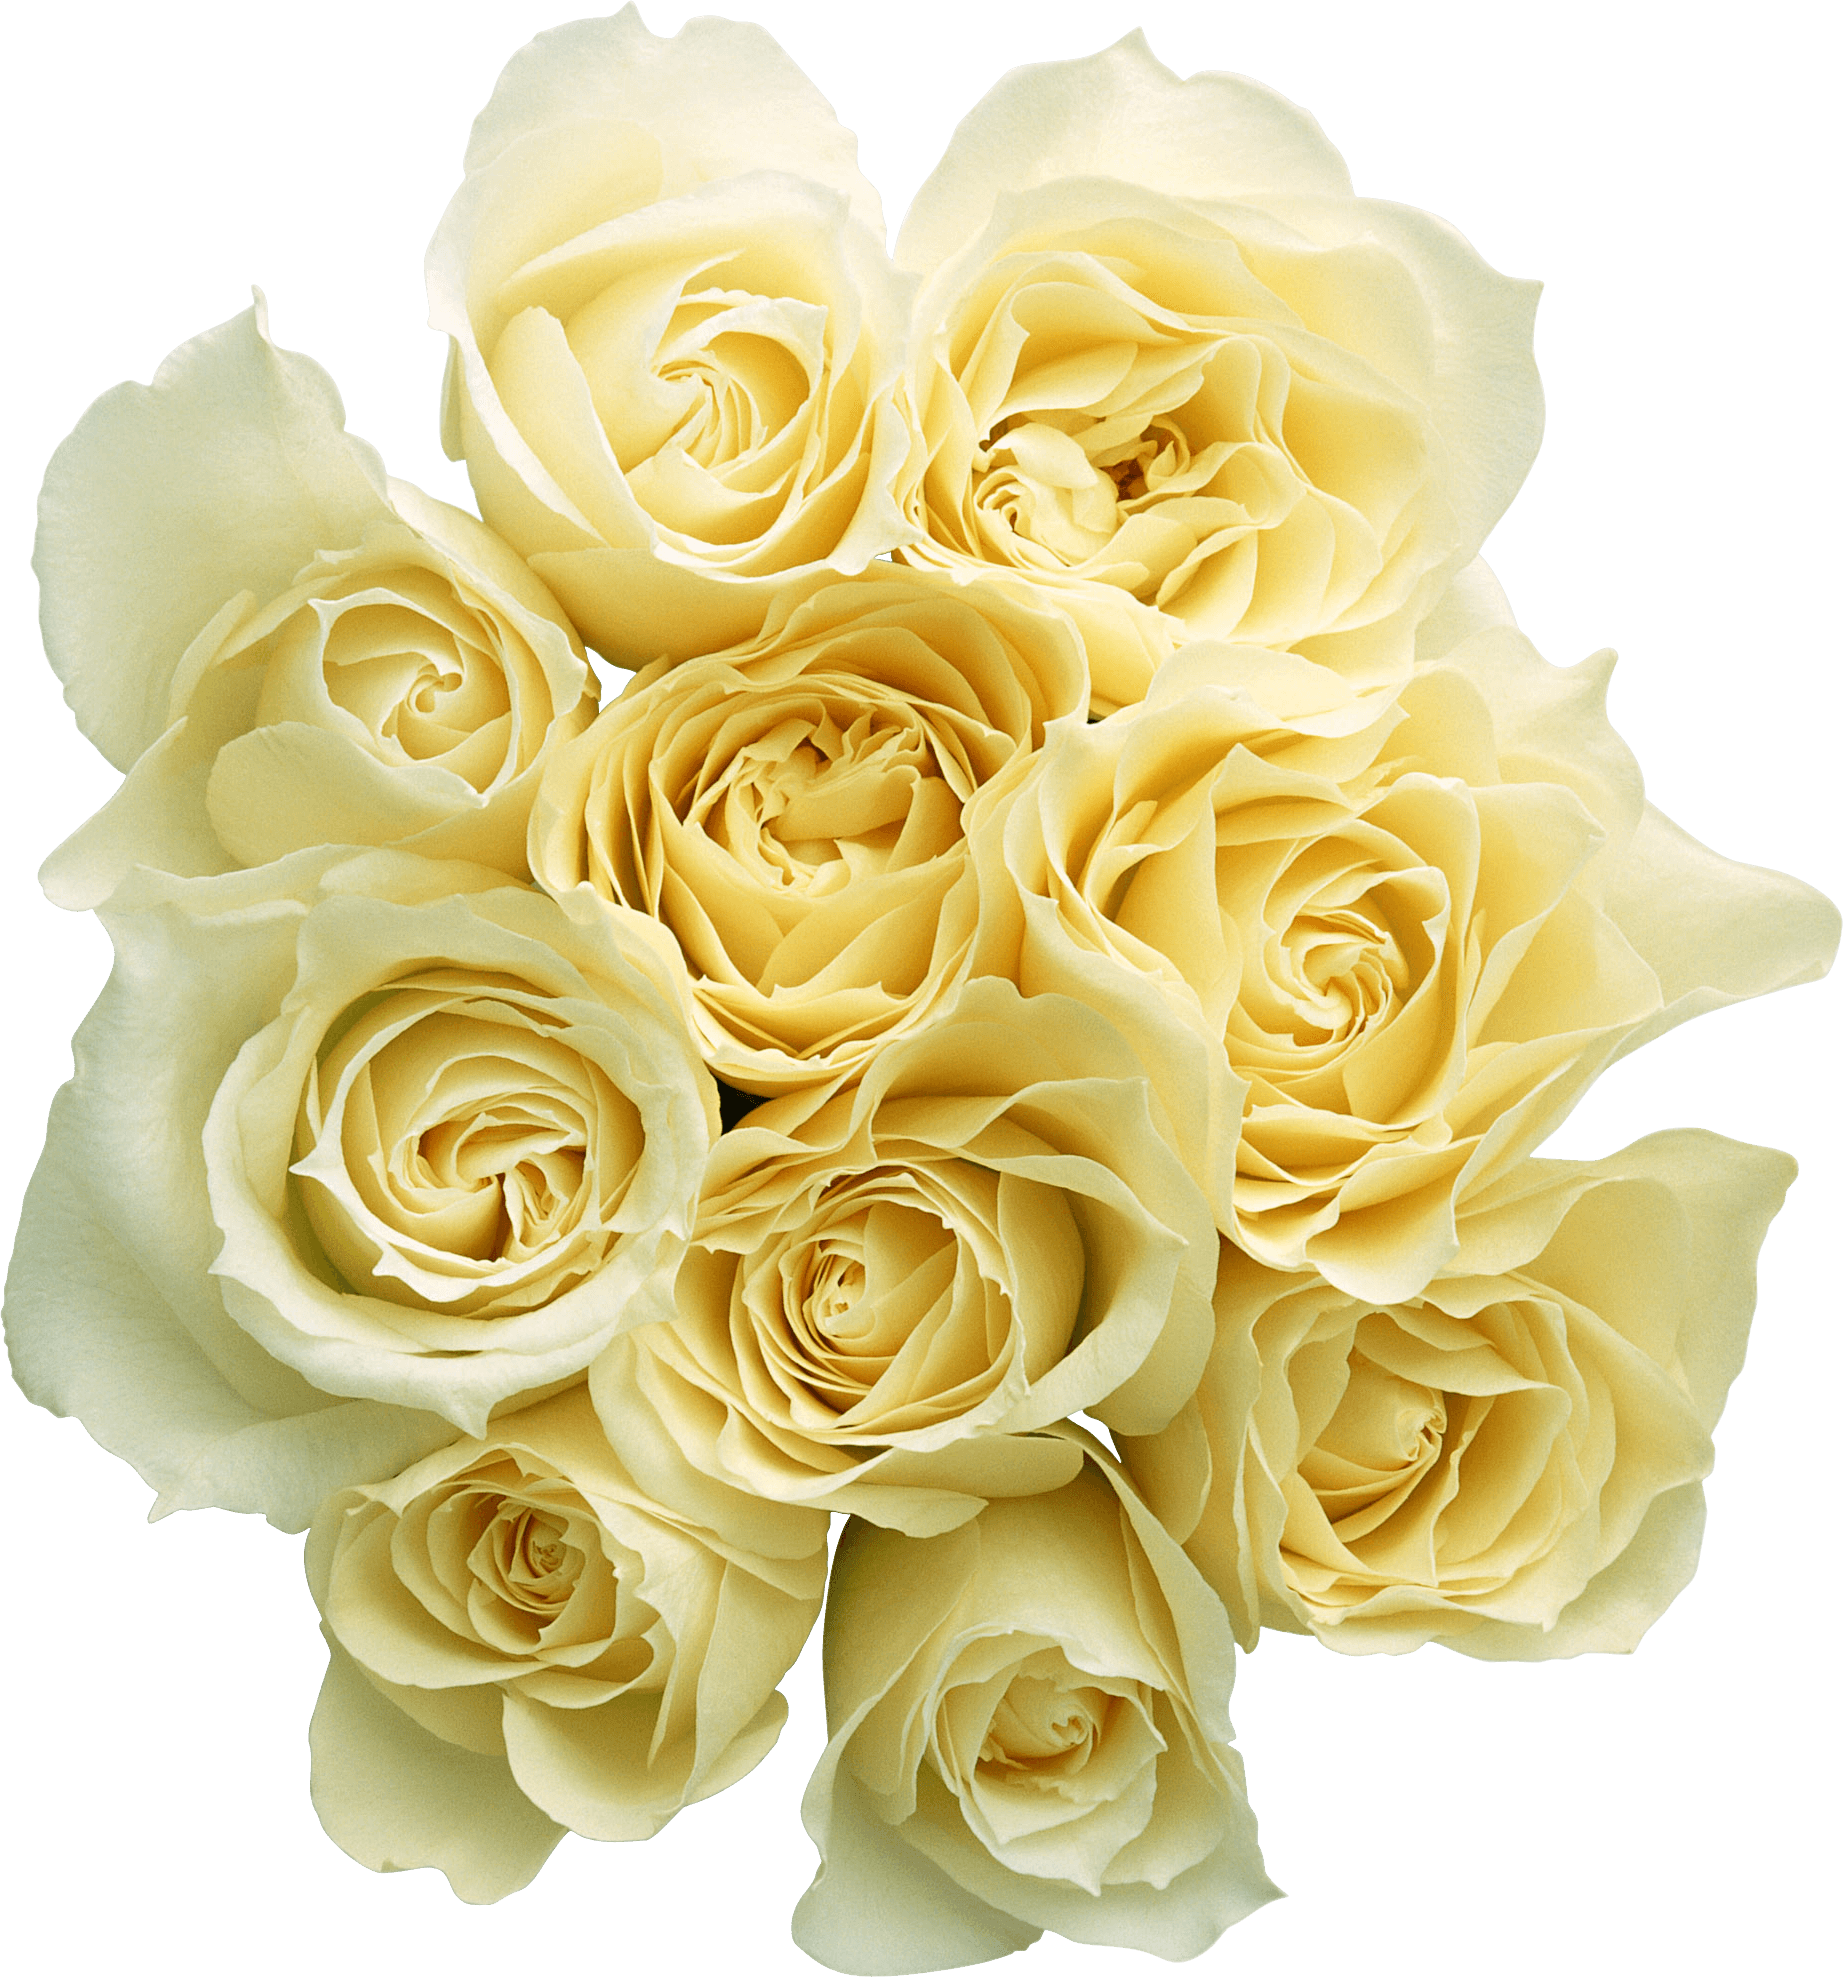 Top White Roses Png Images - White Roses, Transparent background PNG HD thumbnail